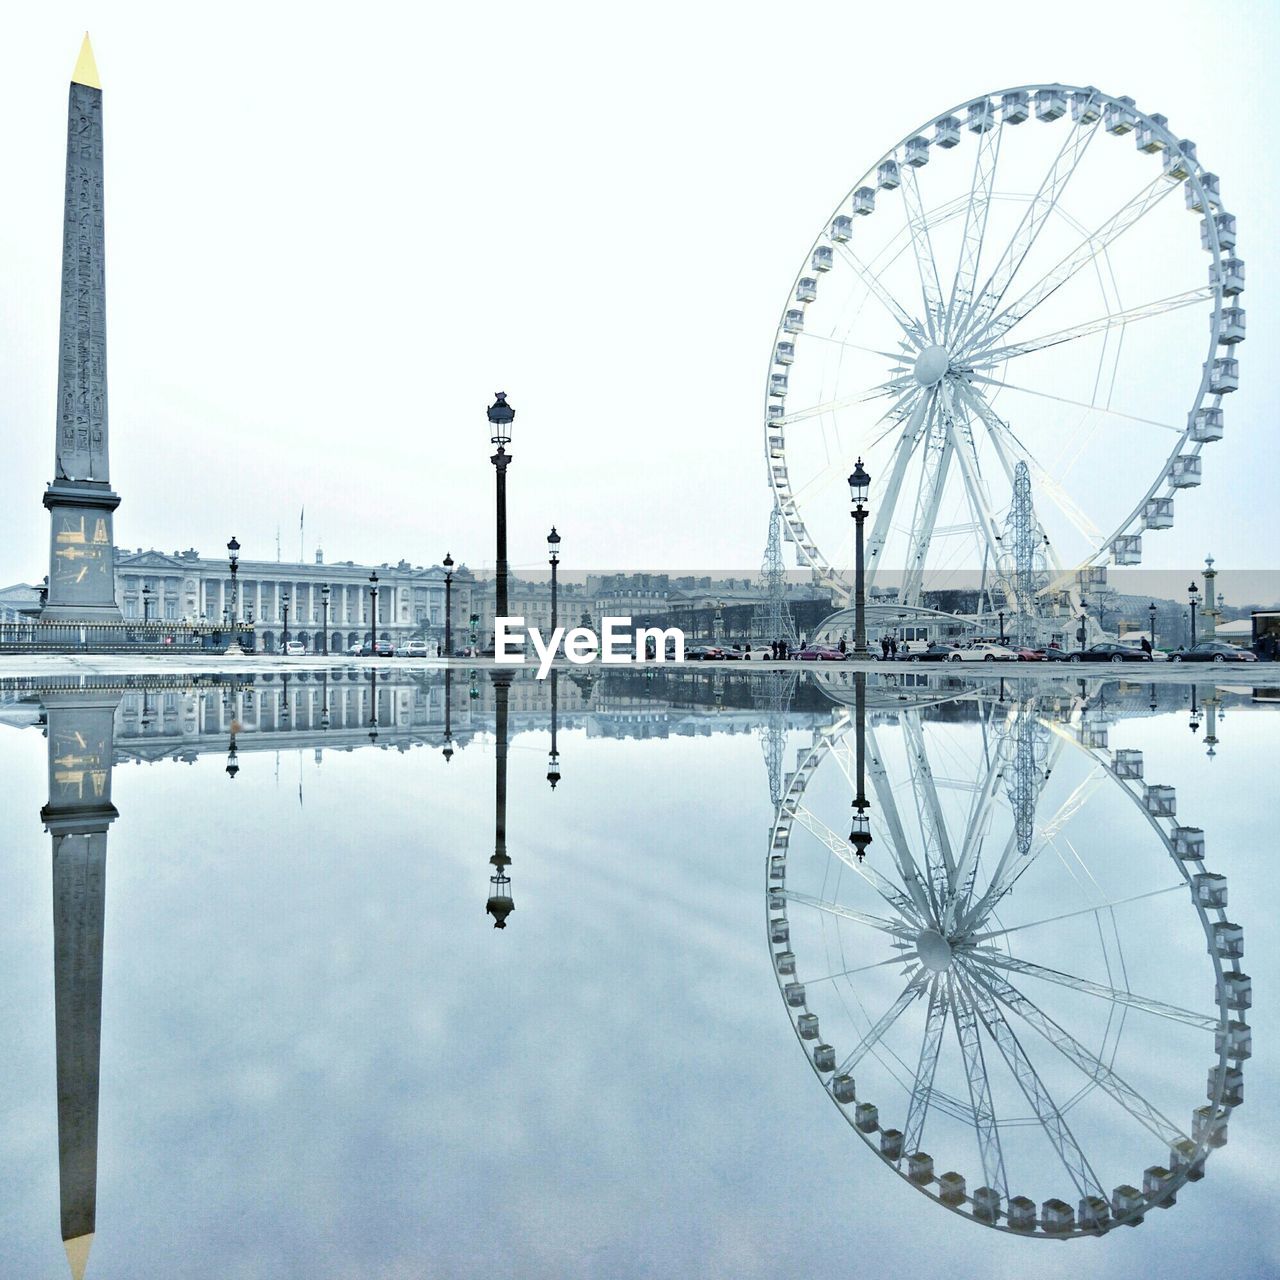 Column monument and ferris wheel by reflecting pool